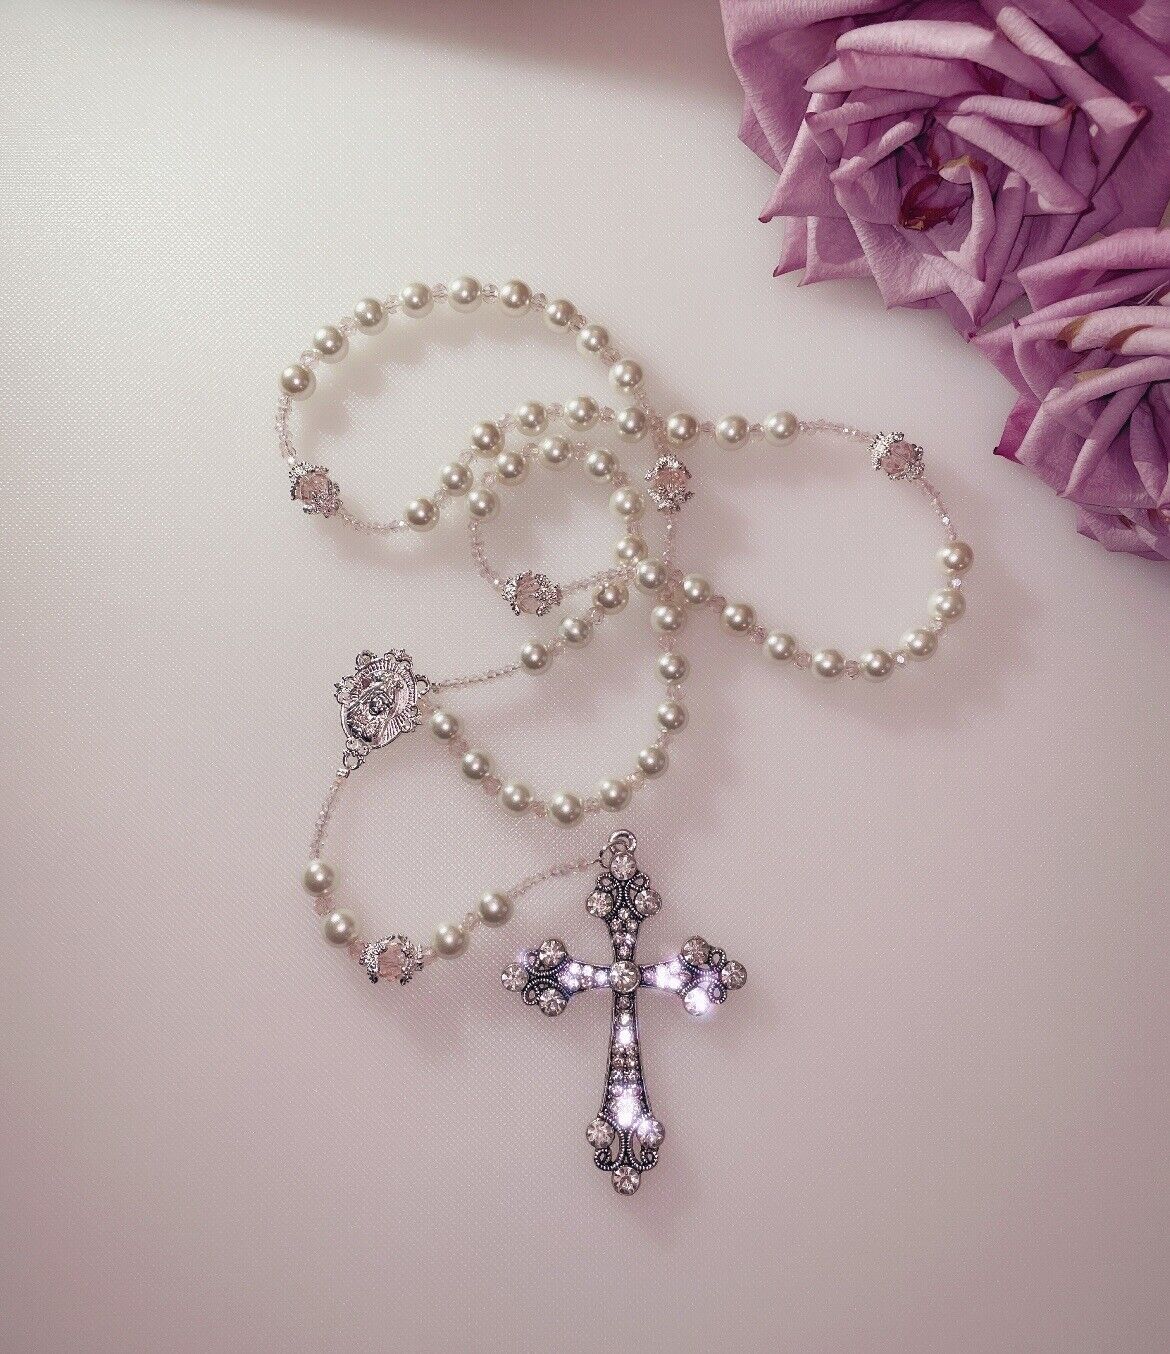 Beautifully Handcrafted Rosary